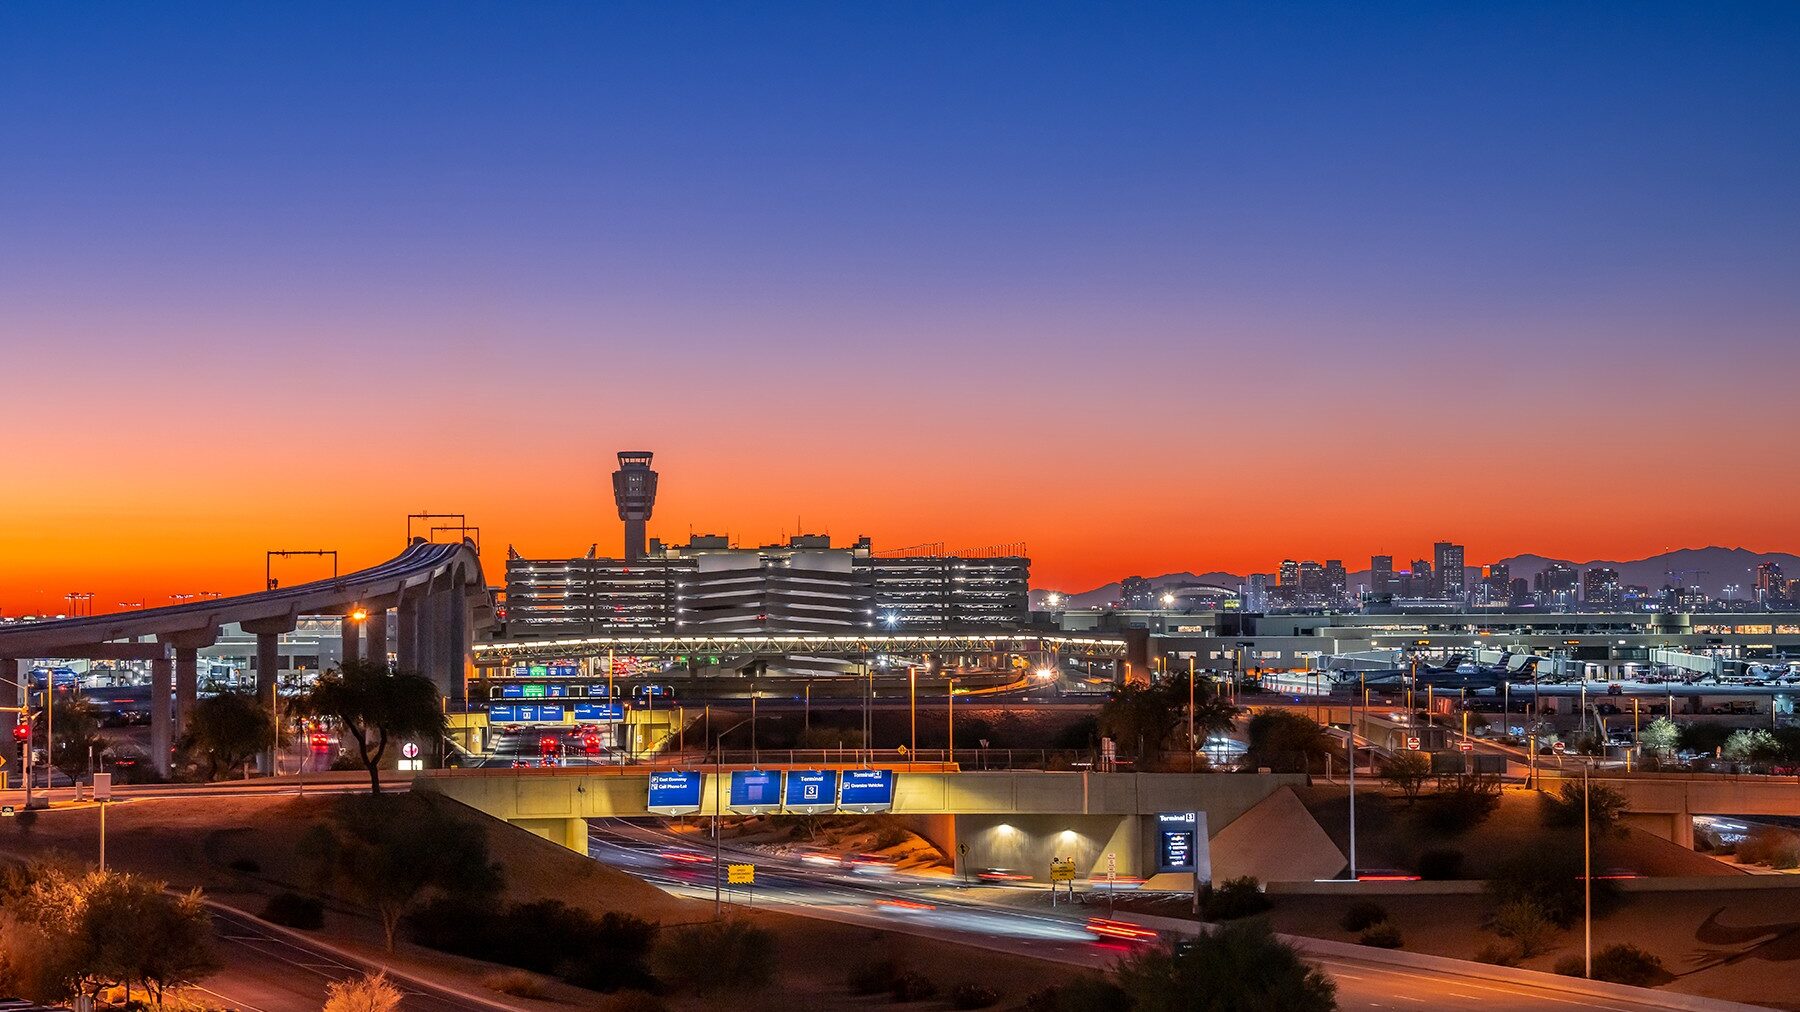 New terminal at Phoenix Sky Harbor International Airport anticipated after 2030